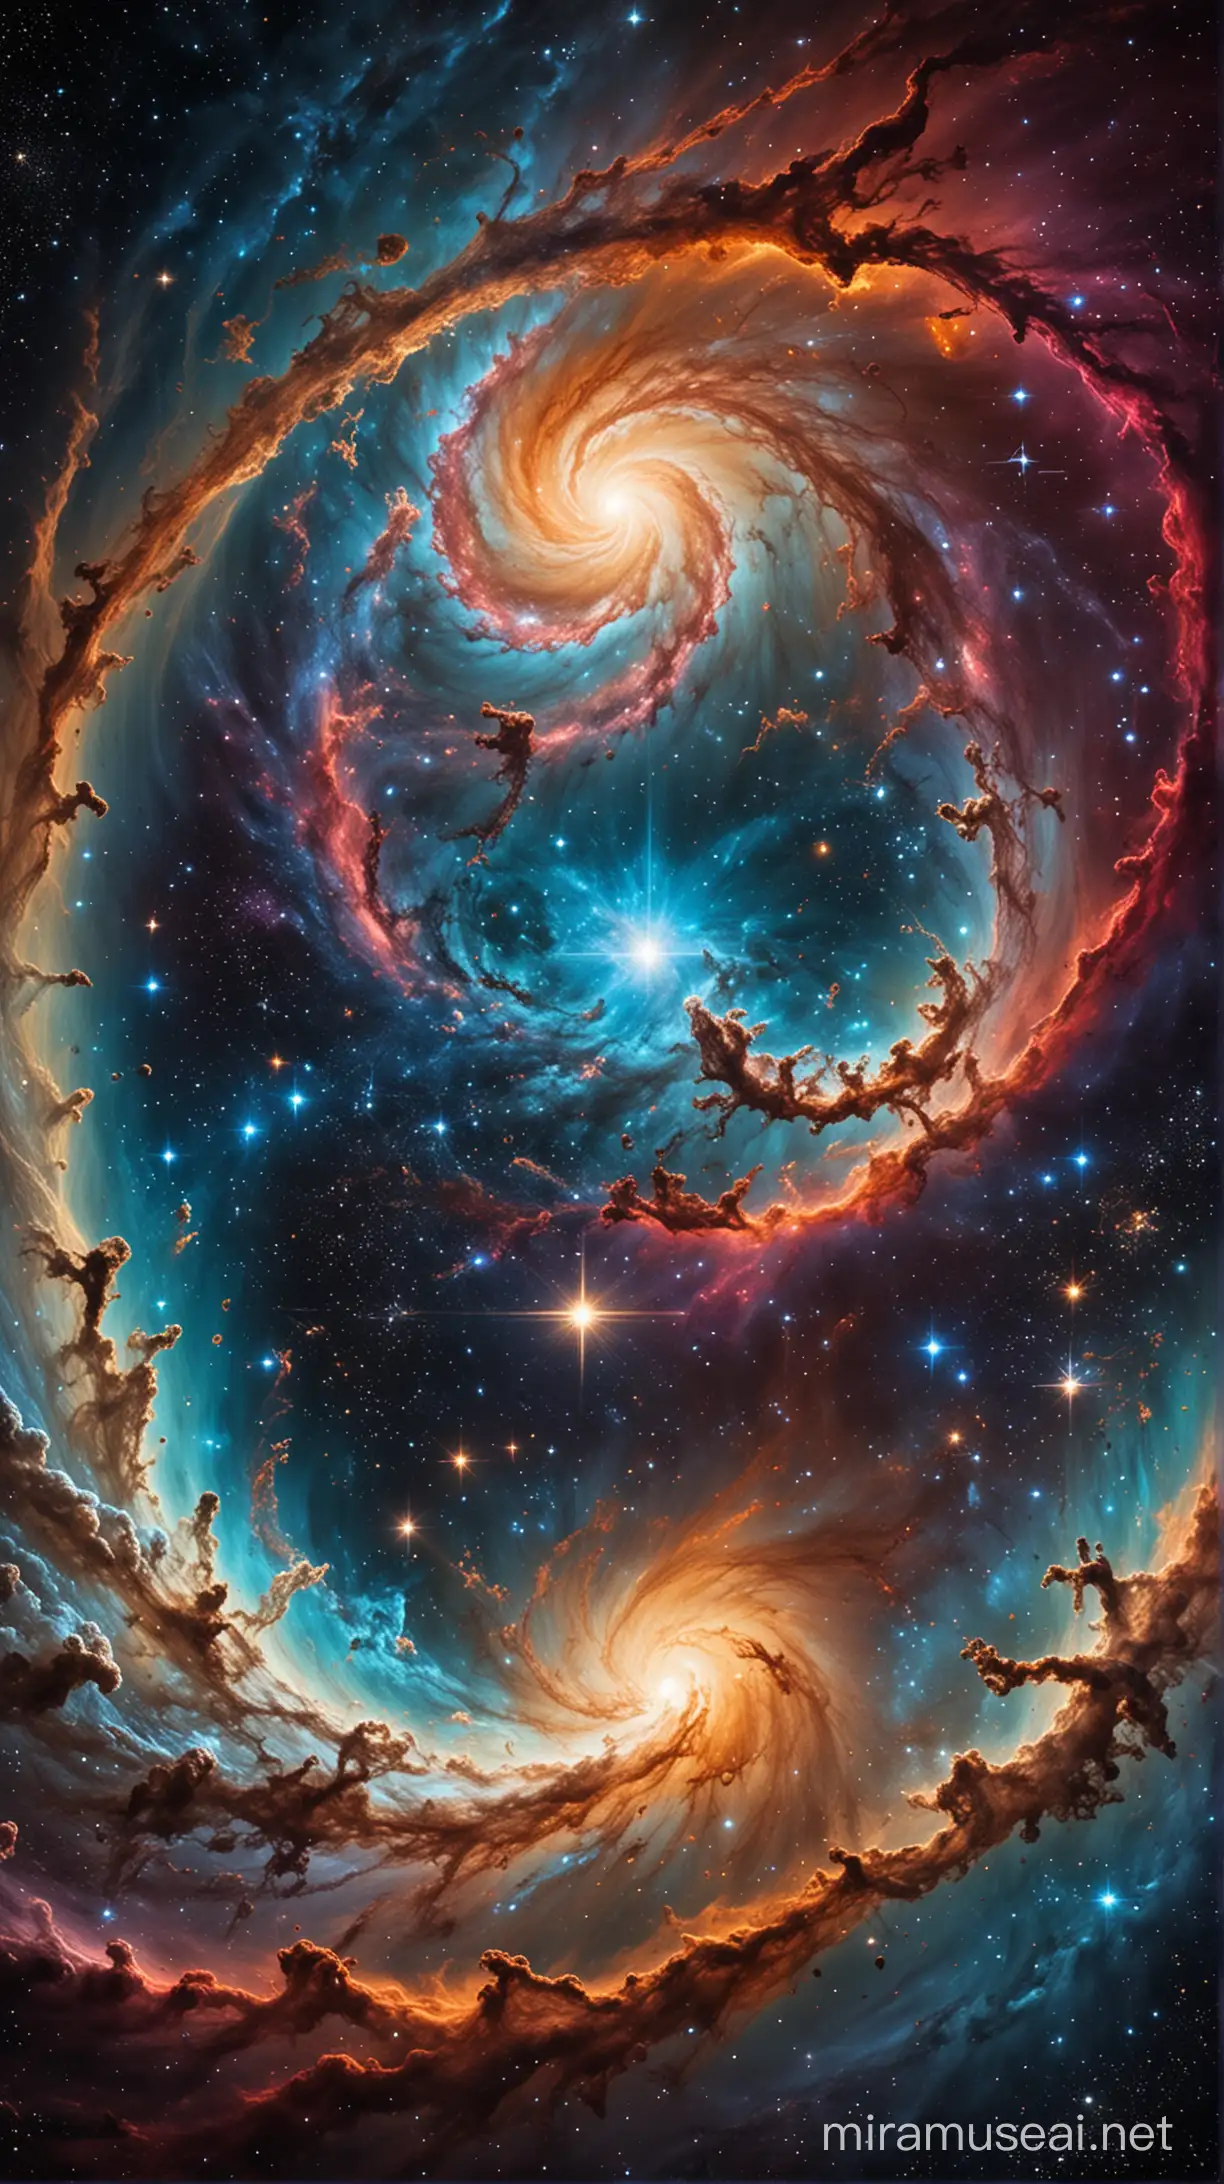 Cosmic Symphony Capturing the Infinite Complexity of the Universe